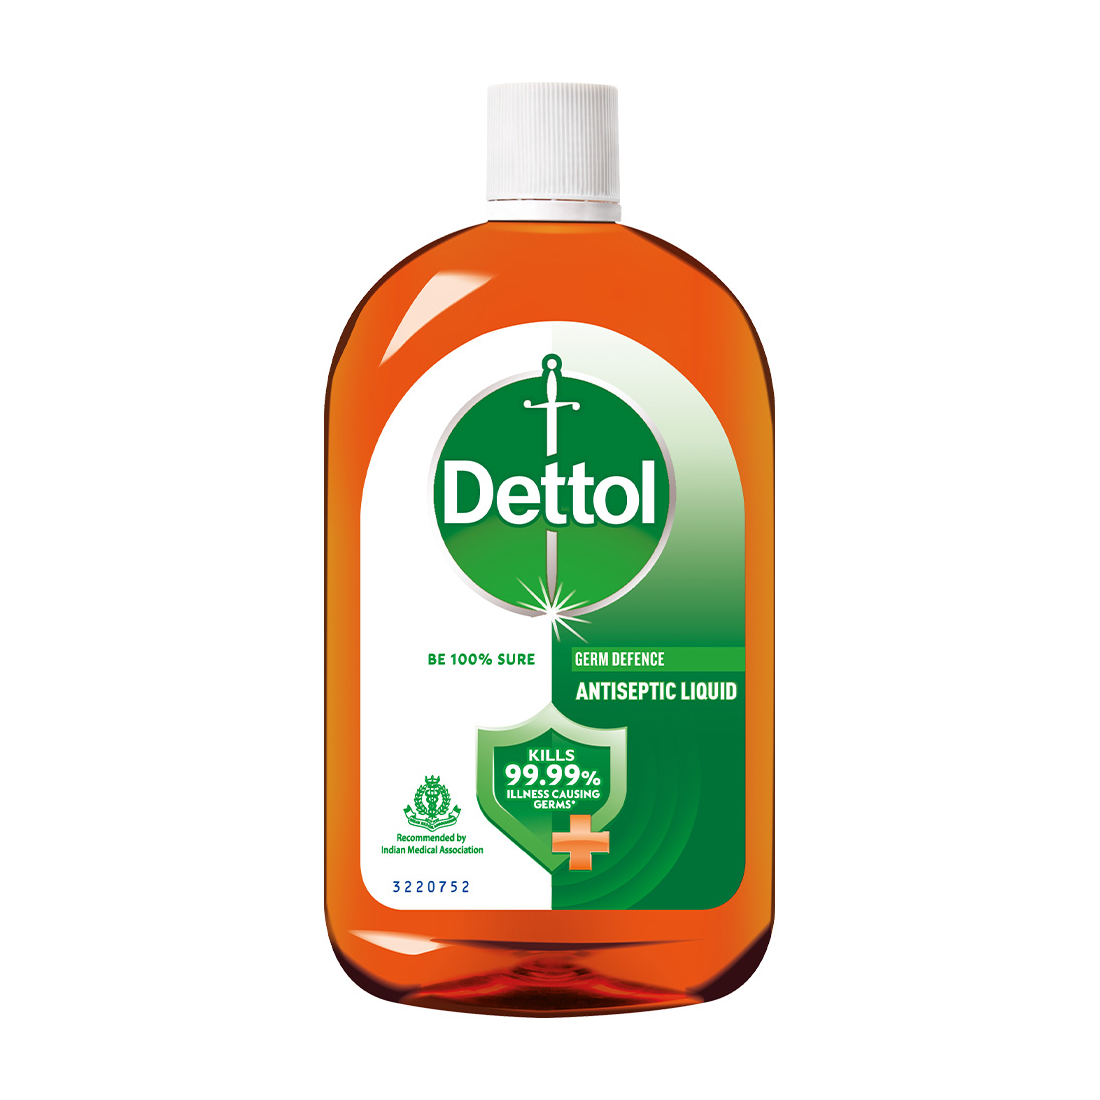 Dettol Antiseptic Liquid for Surface Disinfection and Hygiene | Kills 99.9%^ germs |1L